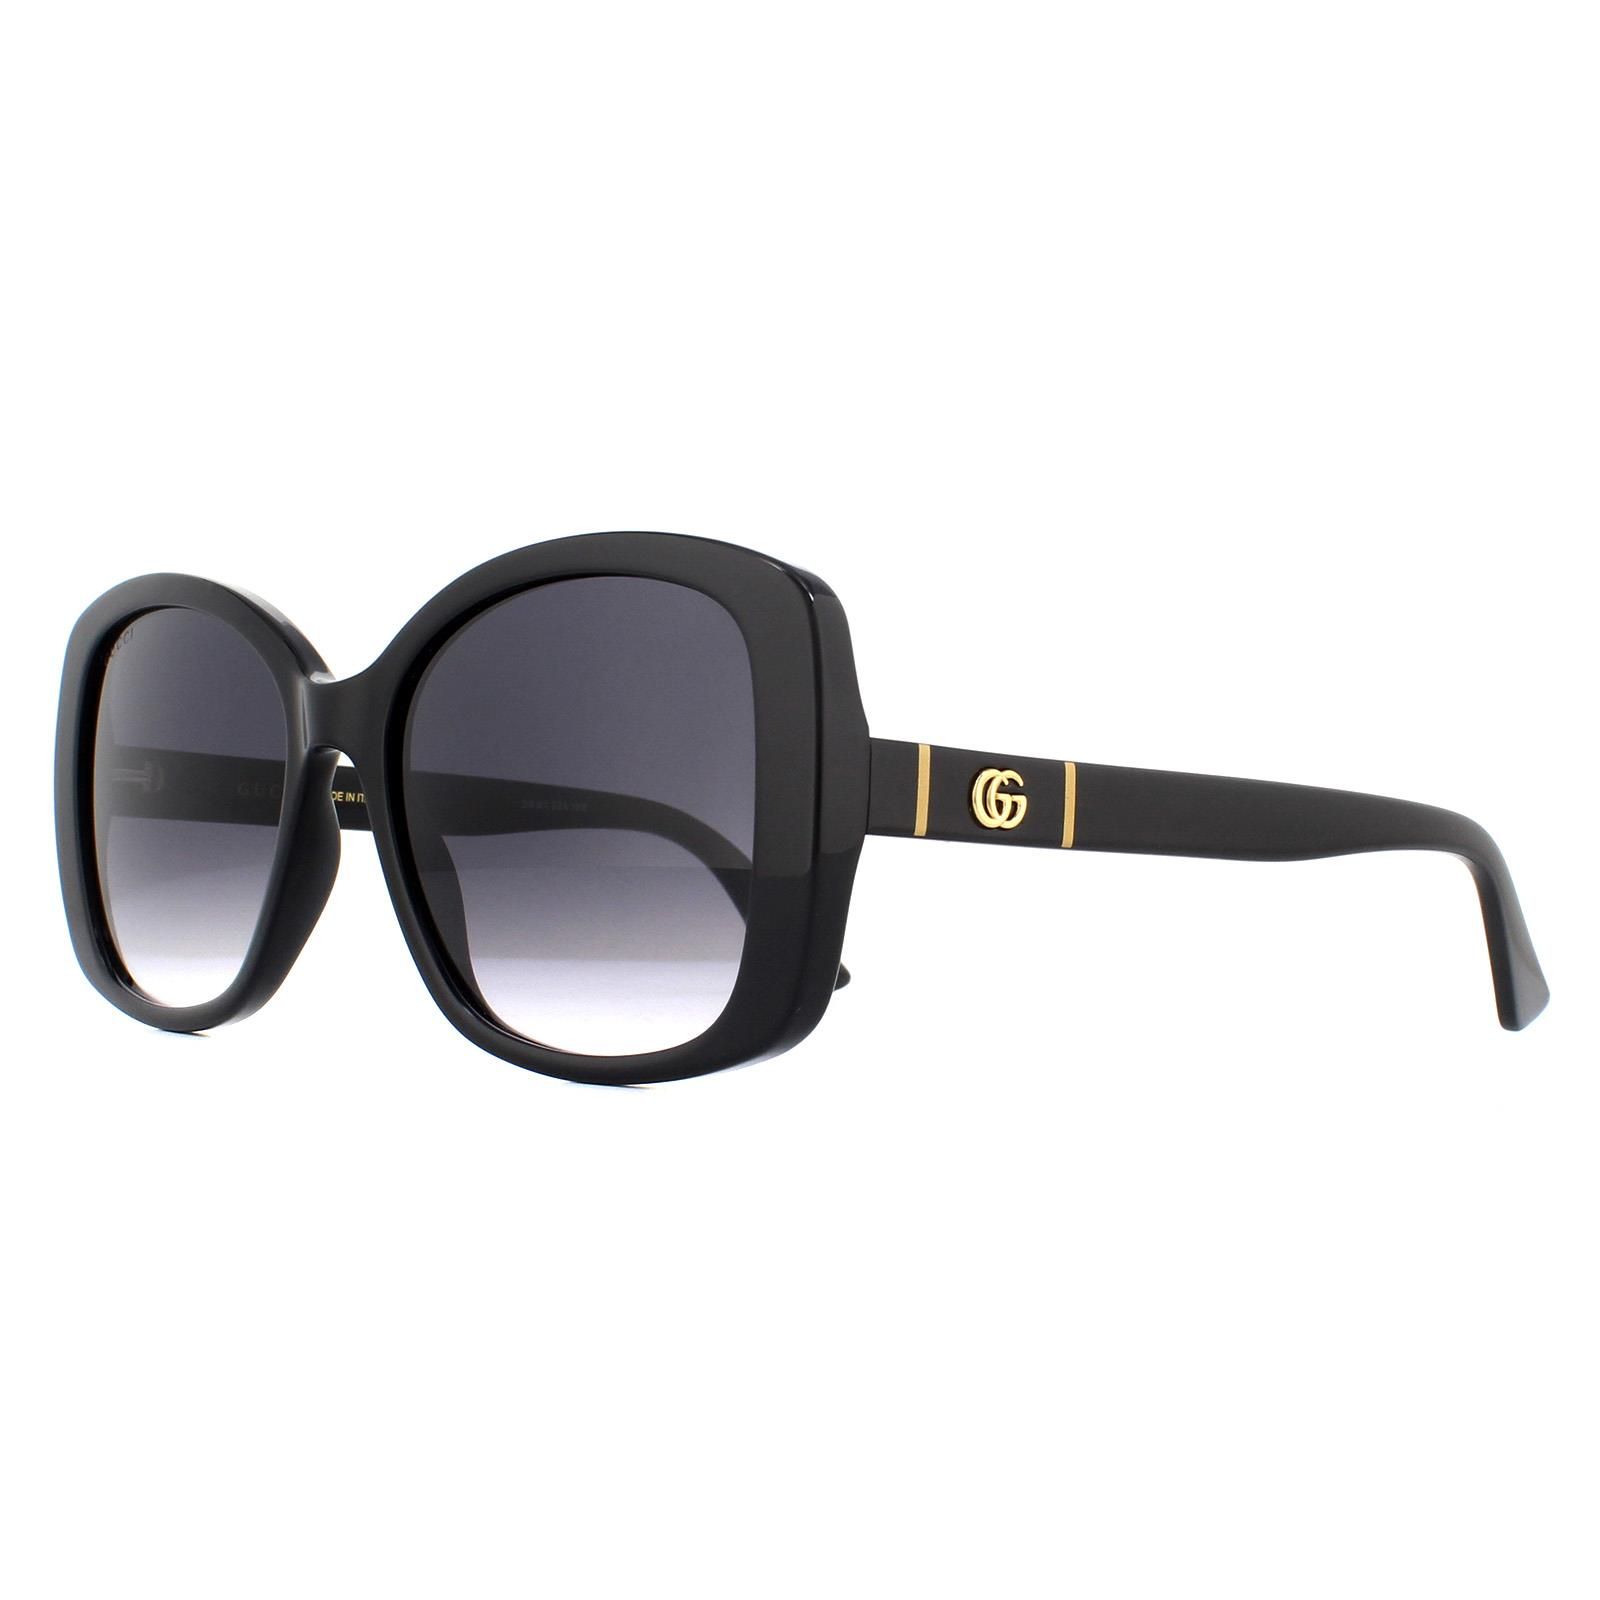 Gucci Sunglasses GG0762S 001 Black Grey Gradient are super feminine butterfly style sunglasses with a chunky acetate frame featuring the interlocking GG logo on the temples.